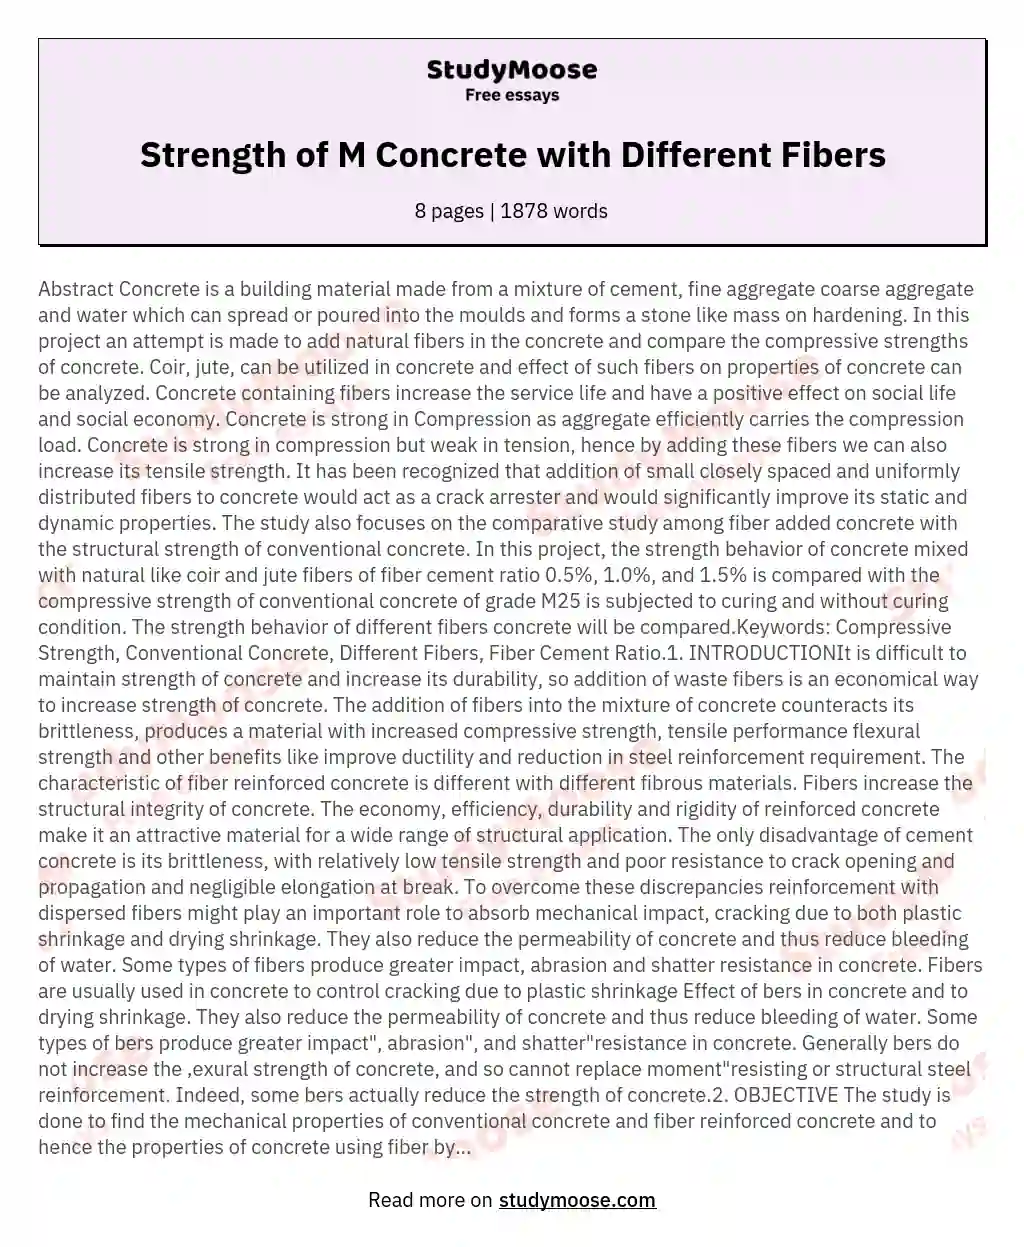 Strength of M Concrete with Different Fibers essay